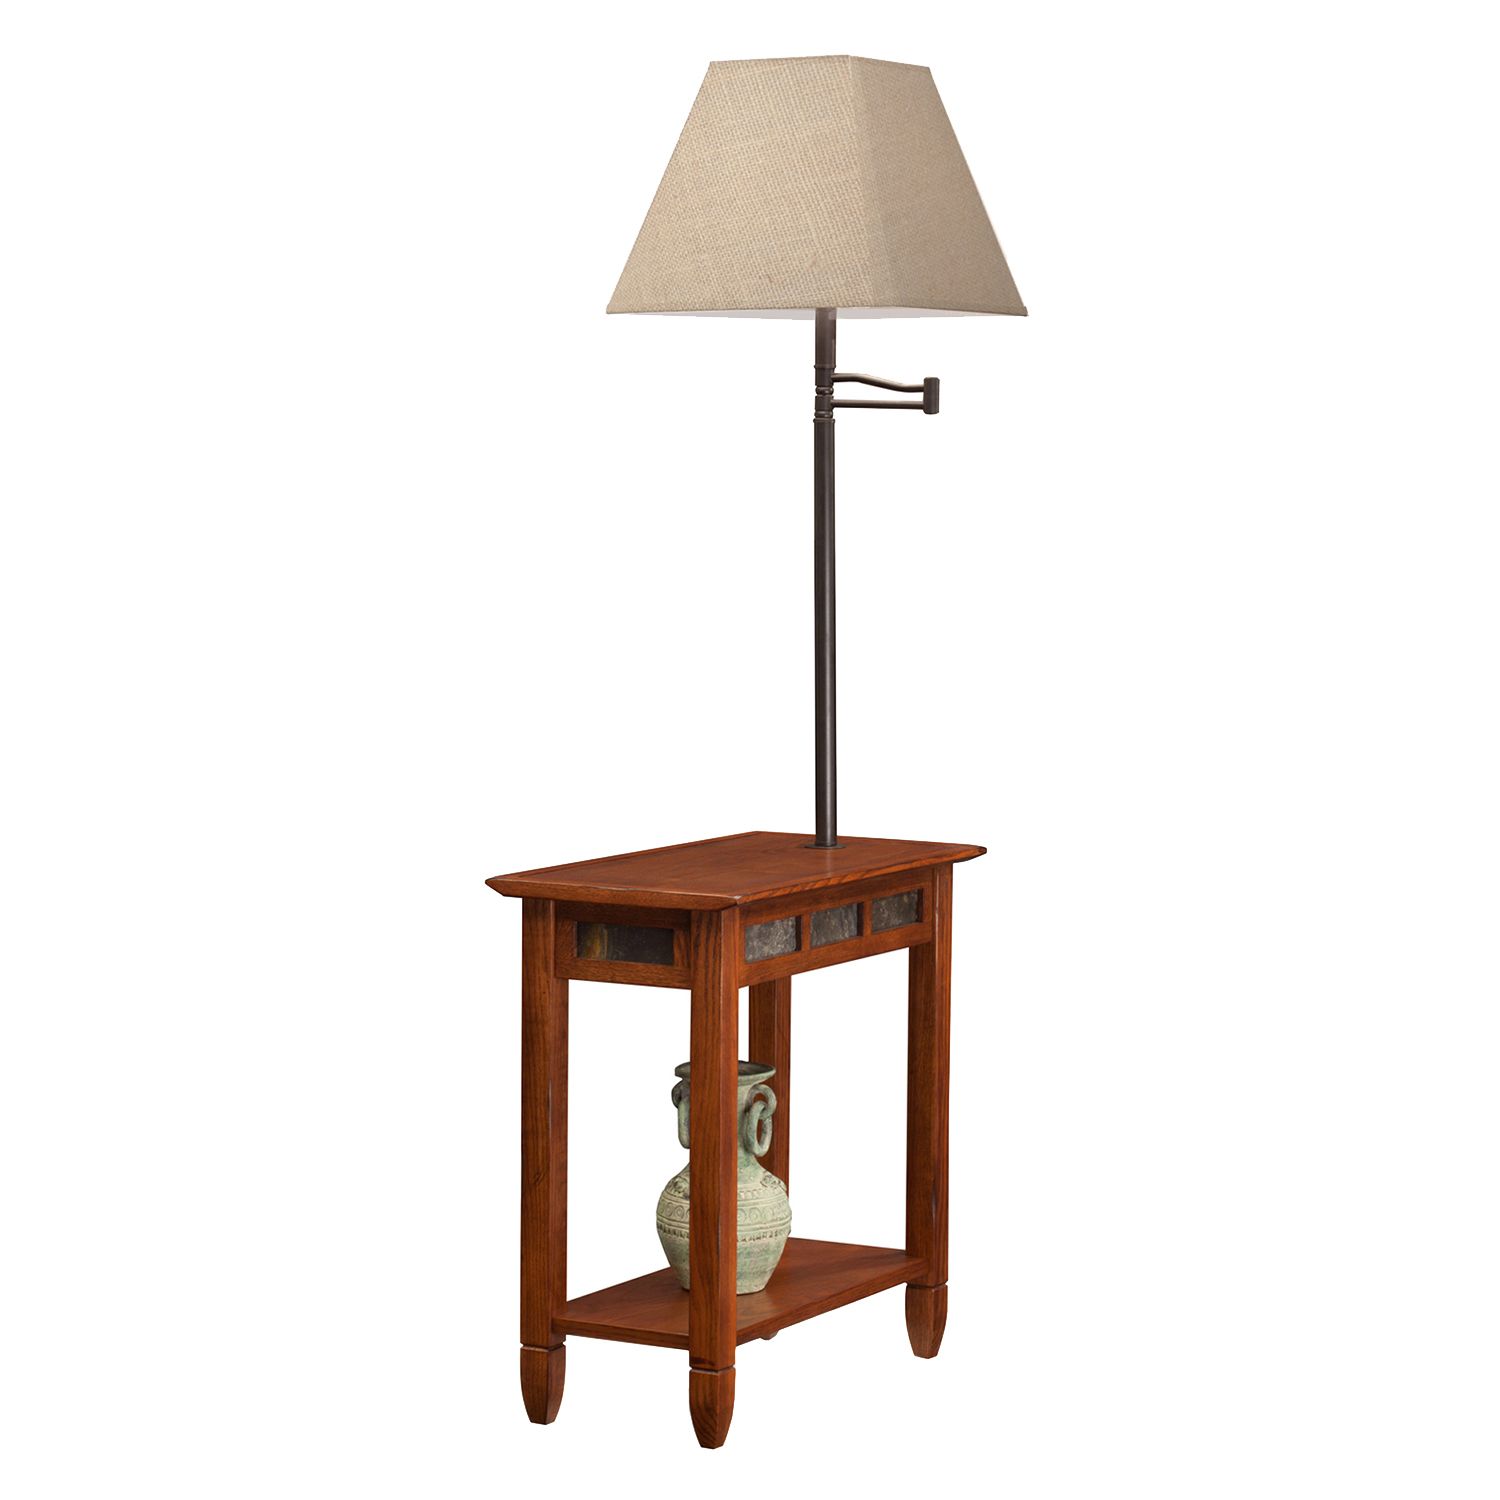 Image for Leick Furniture Vintage Lamp & End Table at Kohl's.